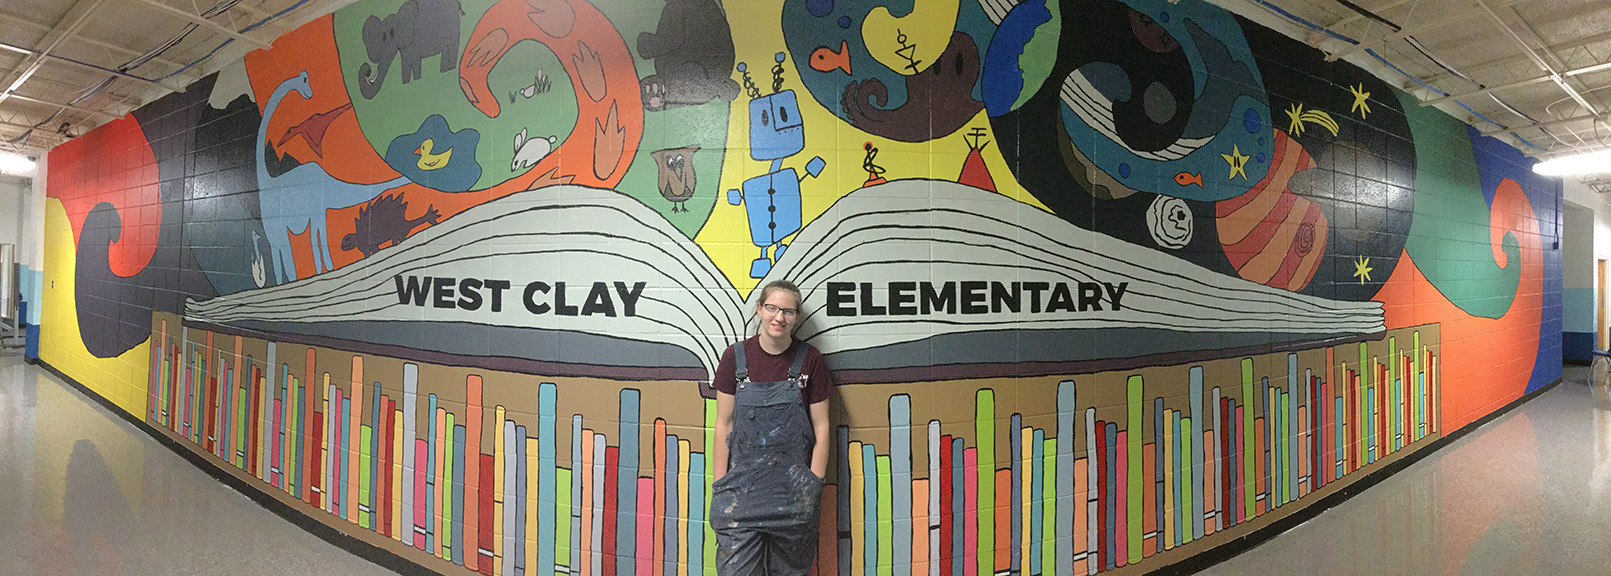 Art student creates mural for West Clay Elementary School | College of